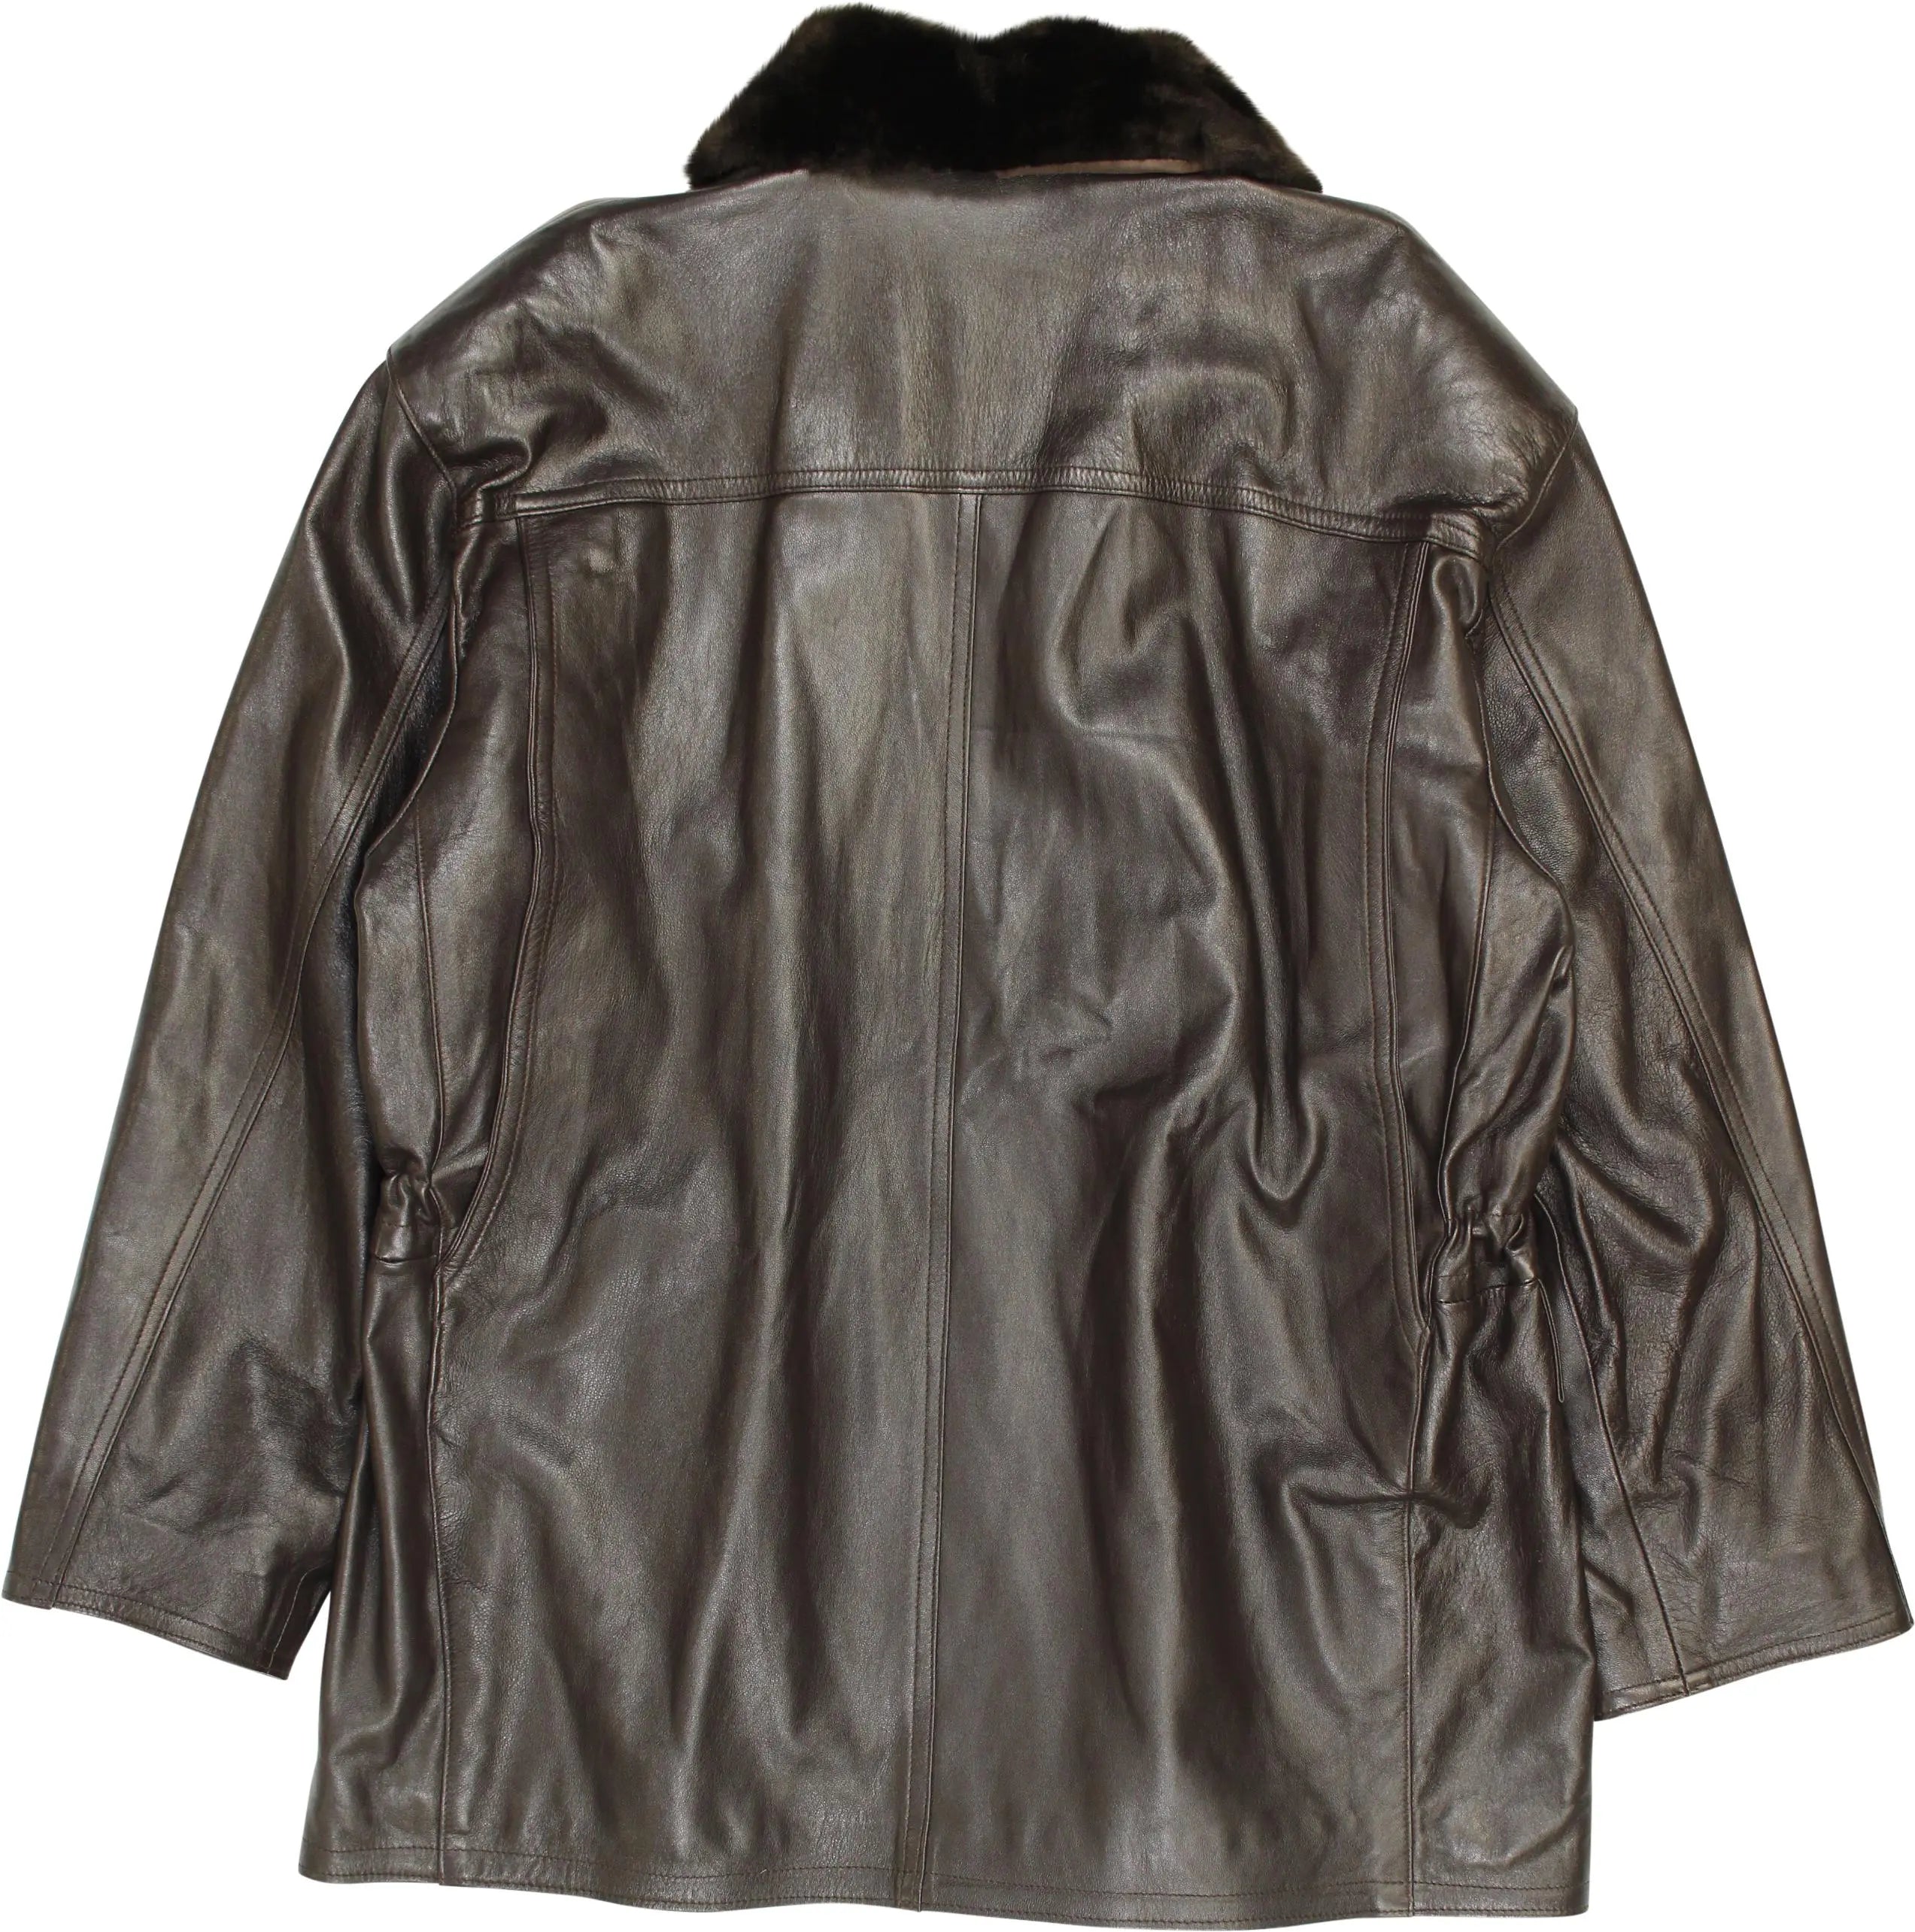 Creazioni In Pelle - Brown leather jacket- ThriftTale.com - Vintage and second handclothing